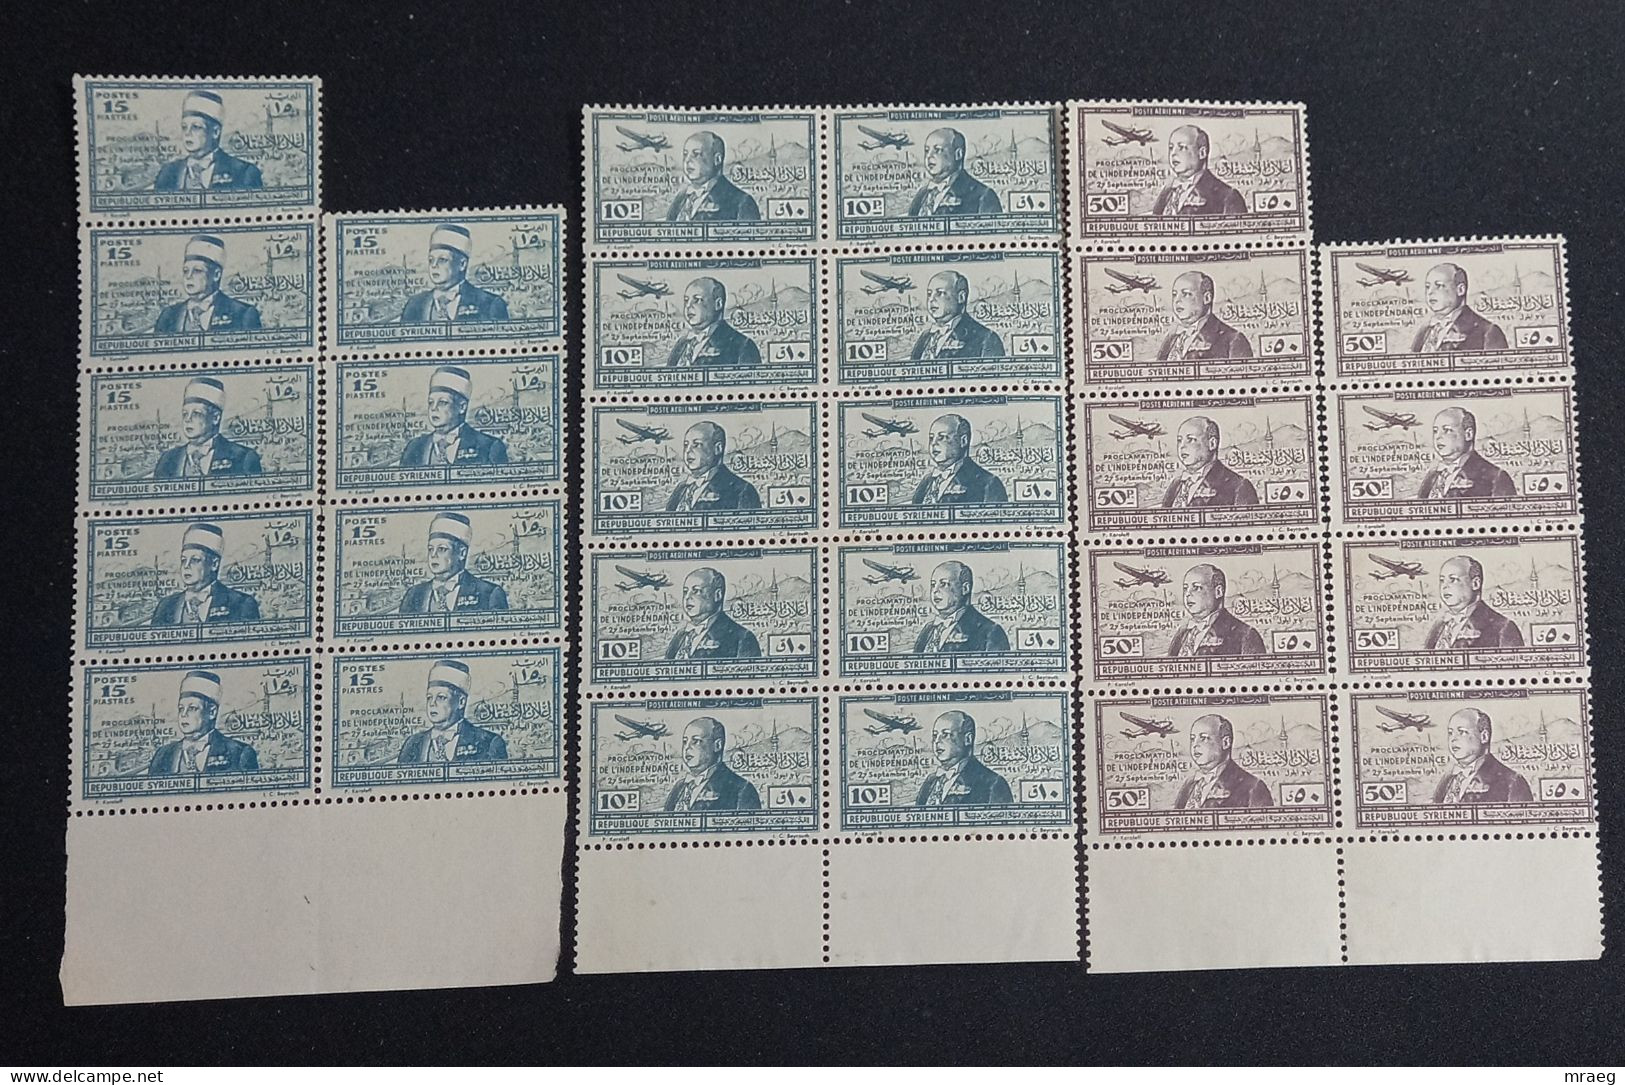 SYRIA 1942 Proclamation Of Independence - President Taj Addin El-Husni BLOCK STAMPS TOTALY 54 UNUSED NG - Syrien